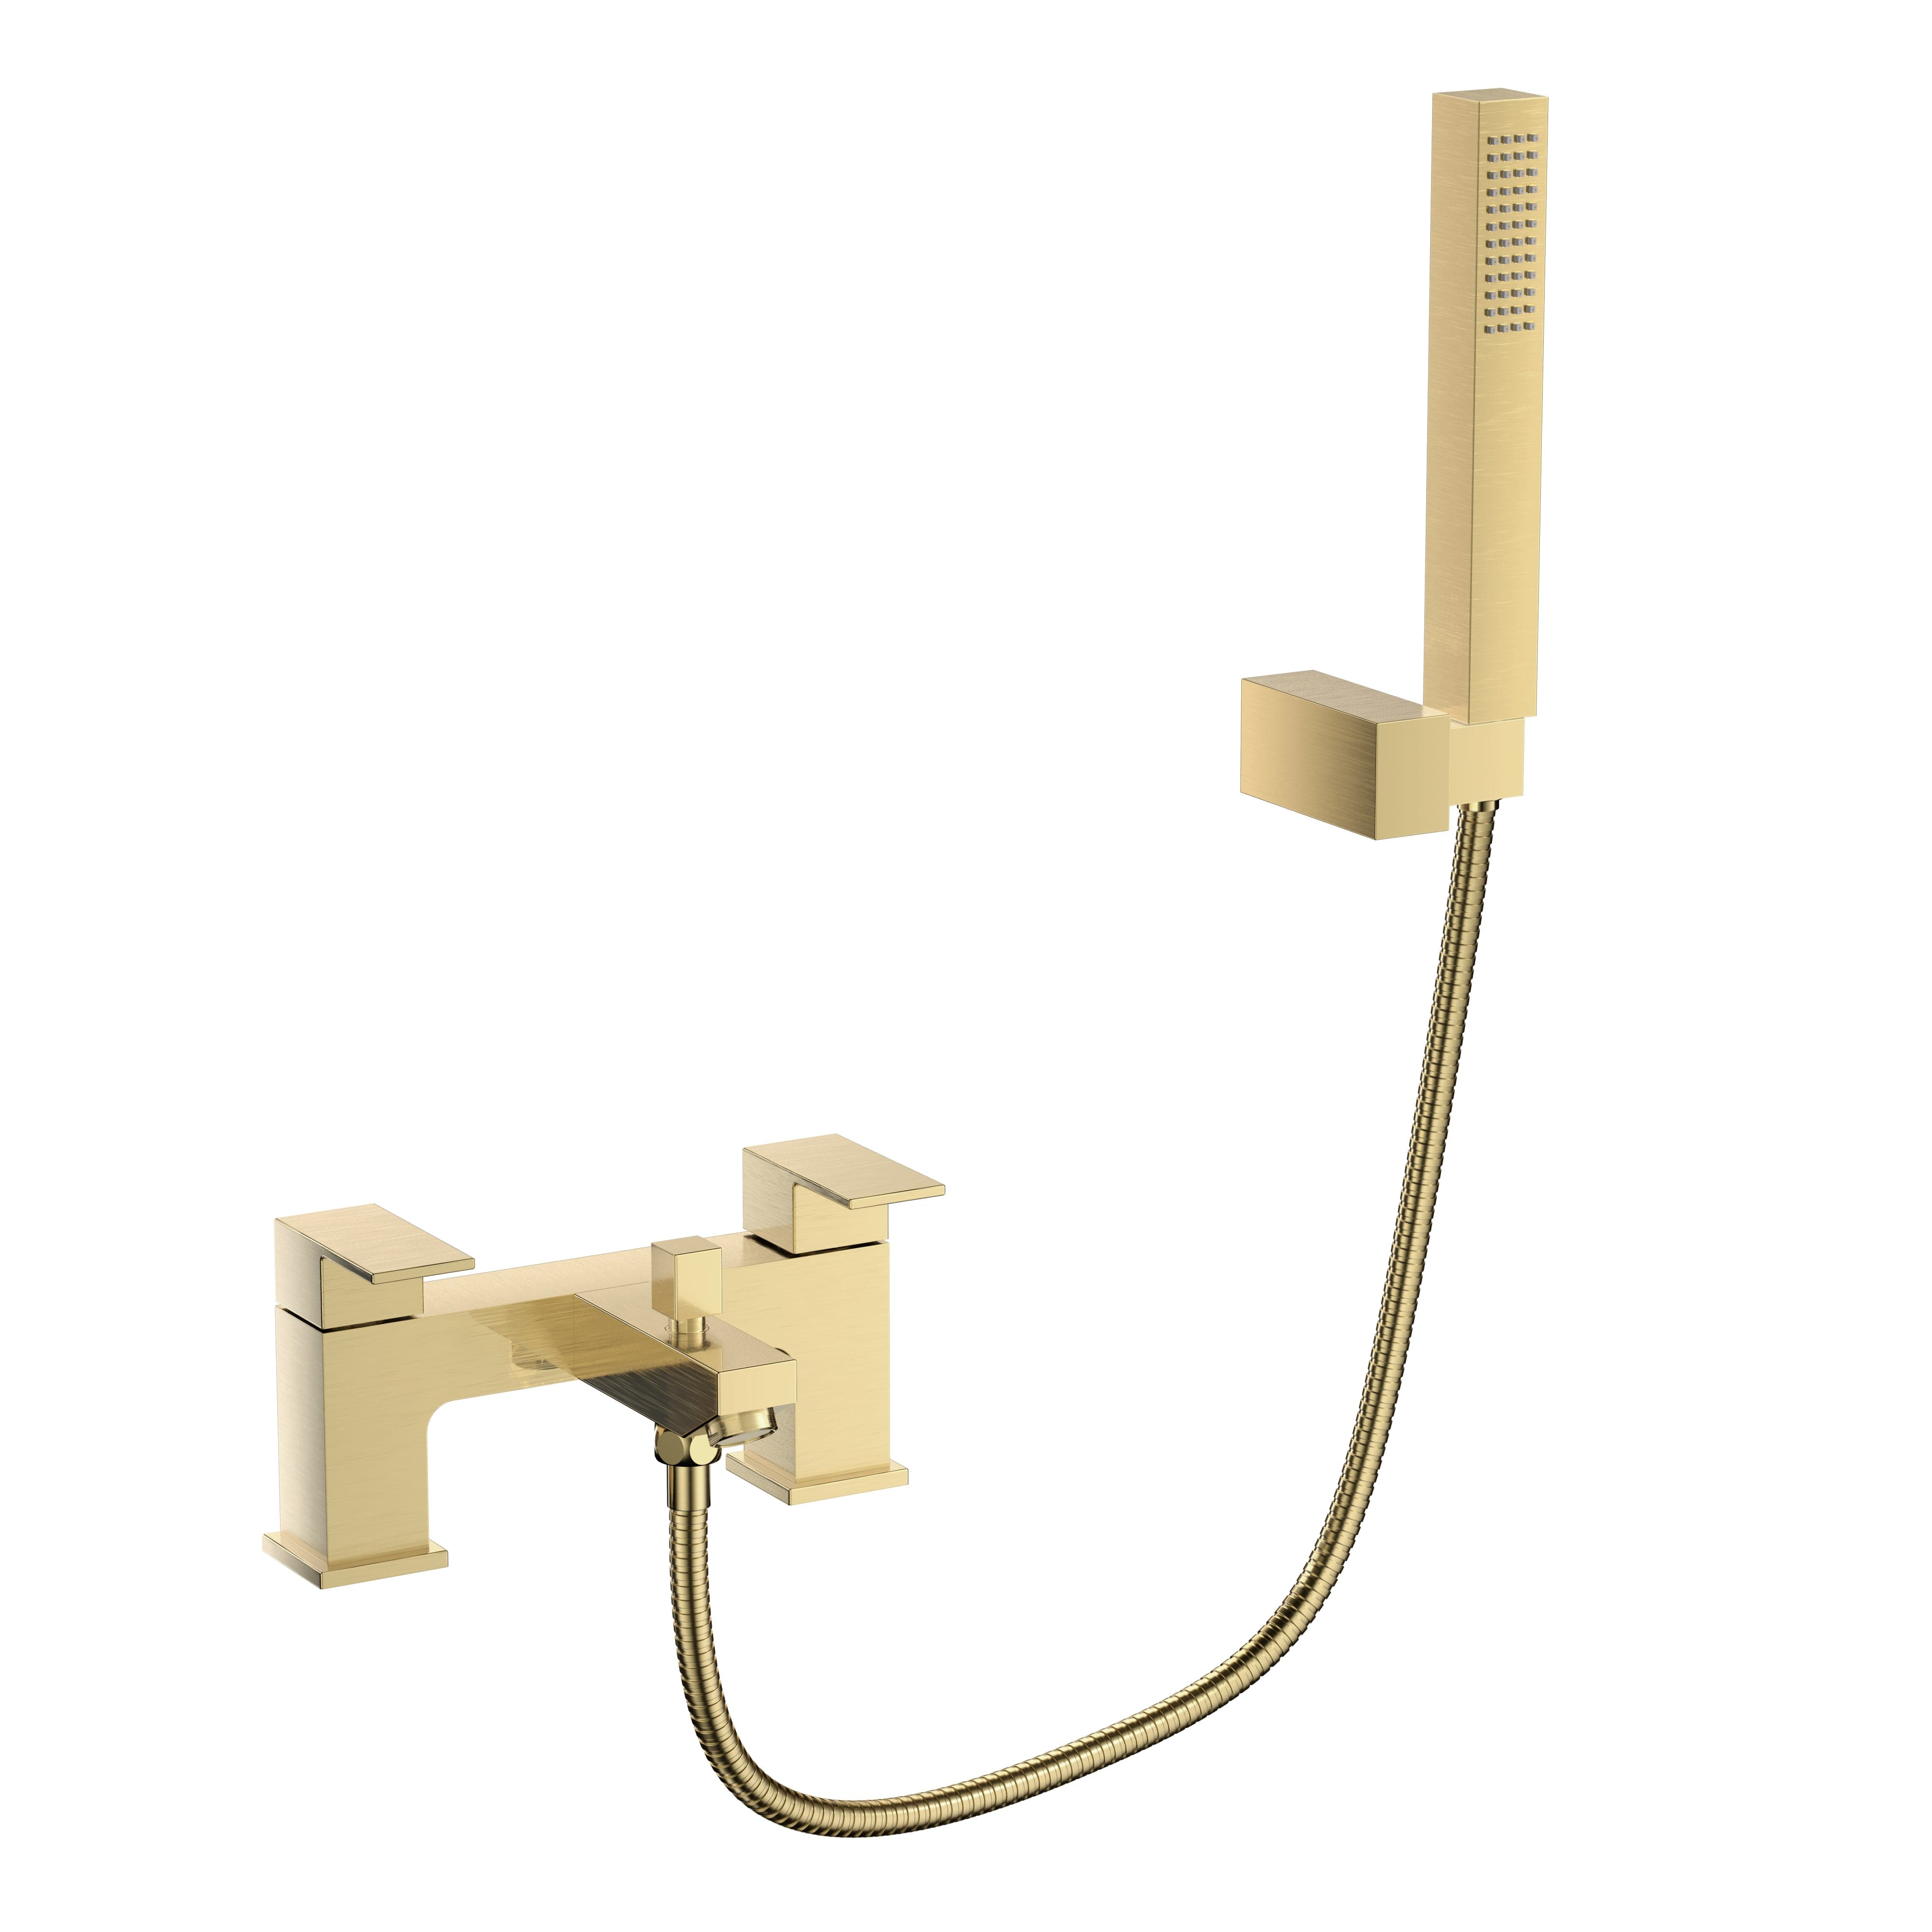 Munro Bath Shower Mixer Tap with Kit - Brushed Brass